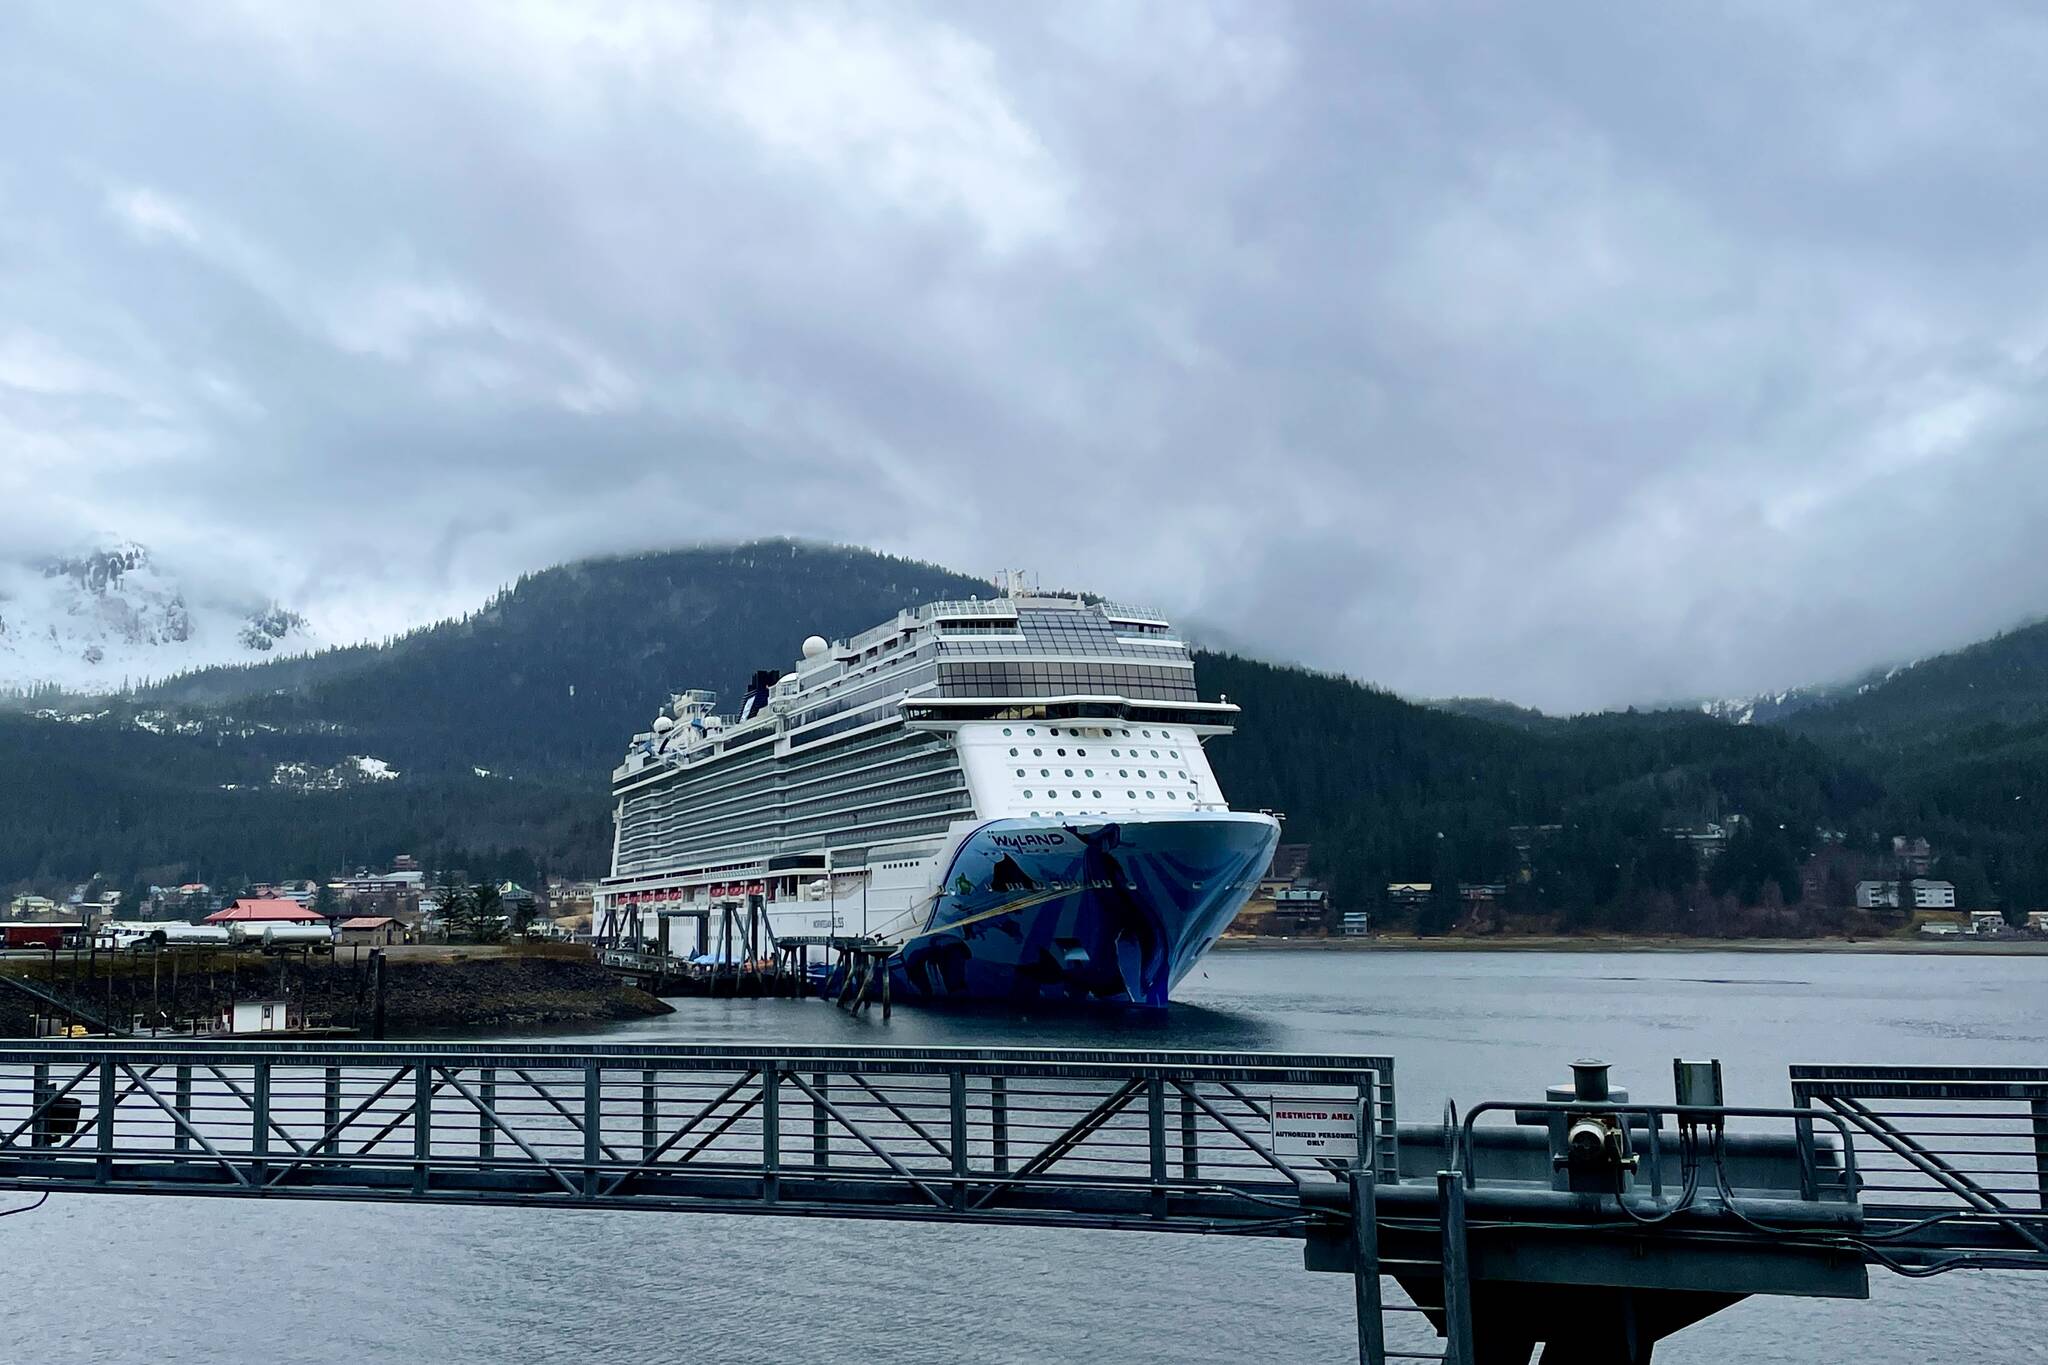 The Norwegian Bliss arrives in Juneau on Monday